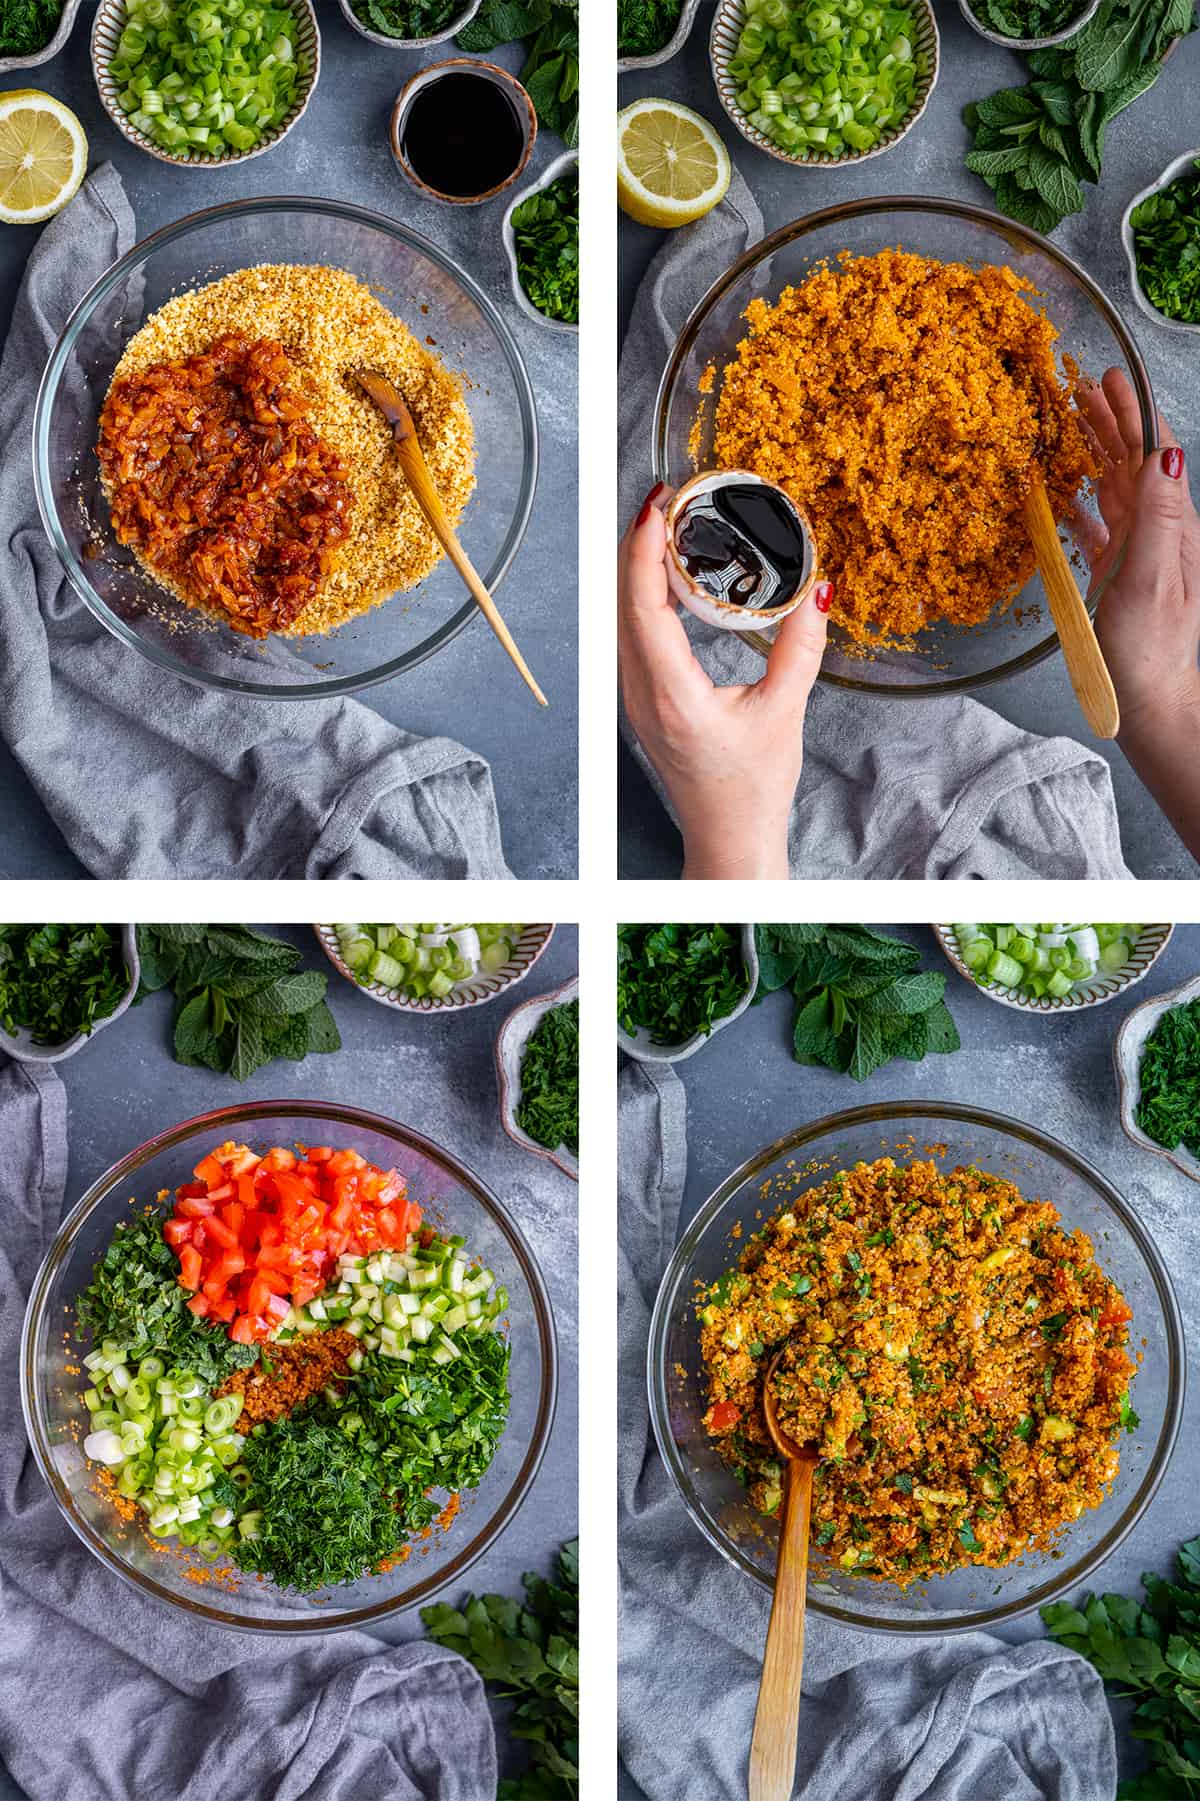 A collage of four images showing the steps of making bulgur salad.